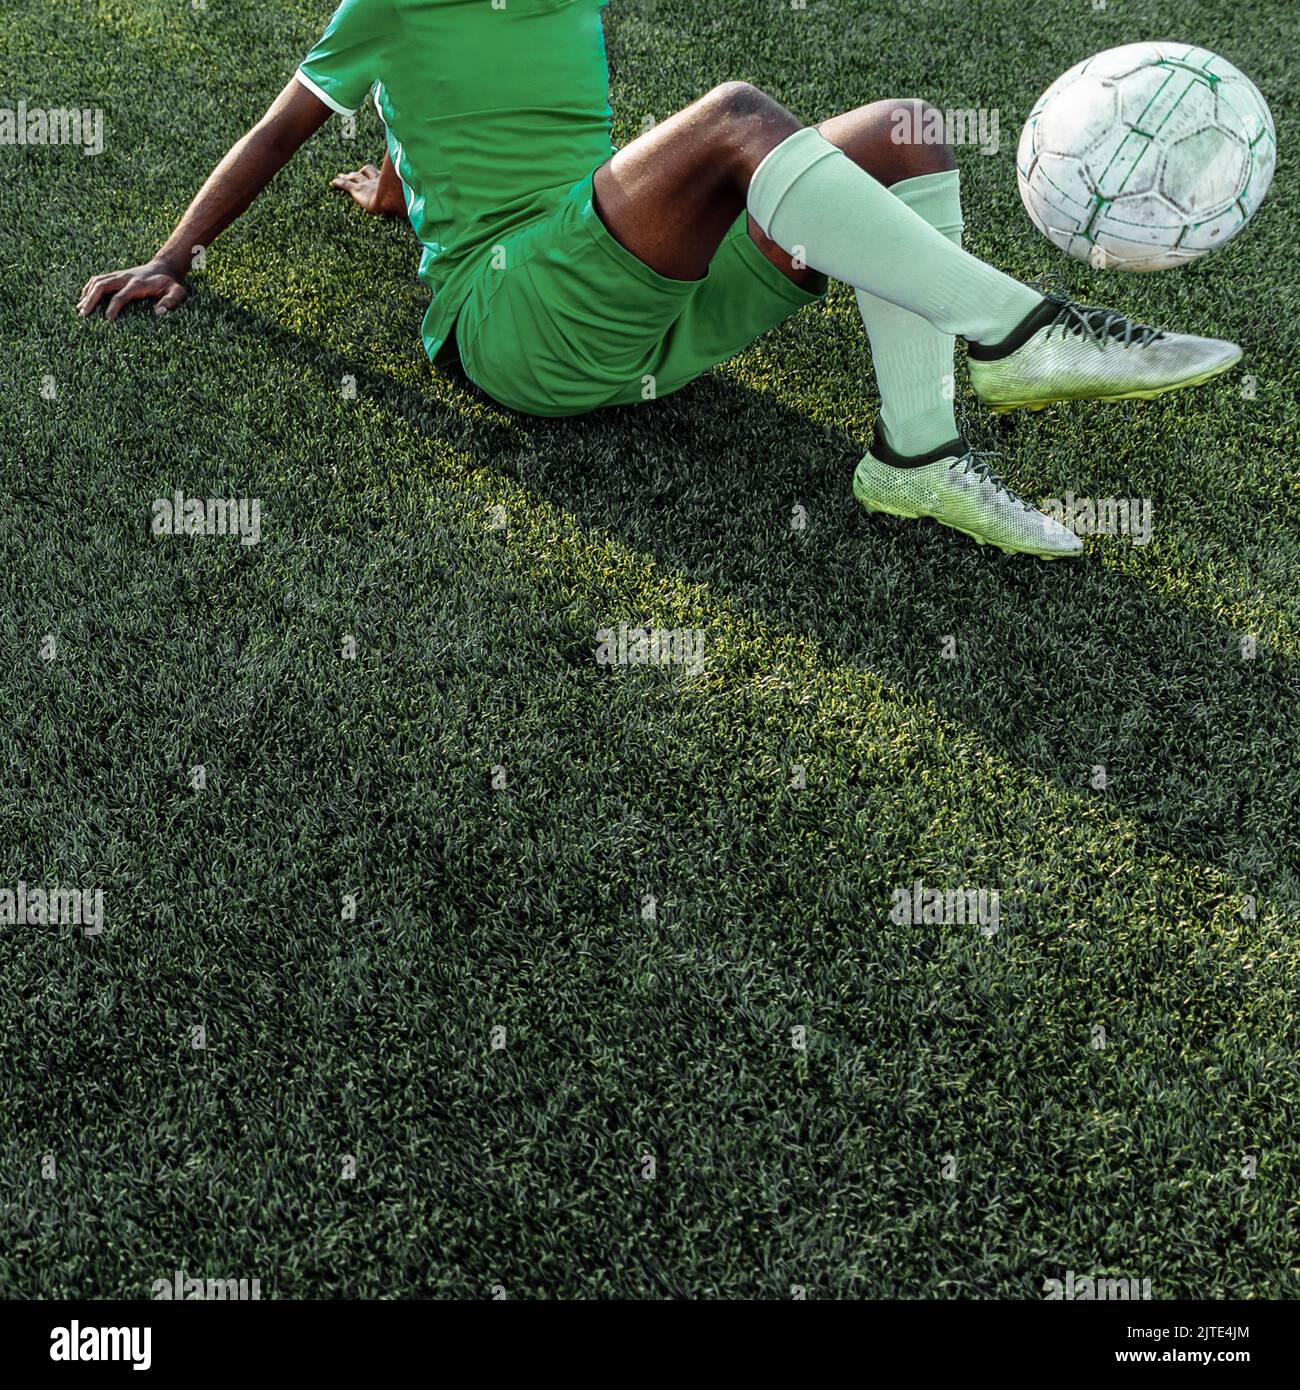 Unrecognizable dark skinned colored man in a green soccer sports uniform holding up a soccer ball while lying down on the football field. Stock Photo